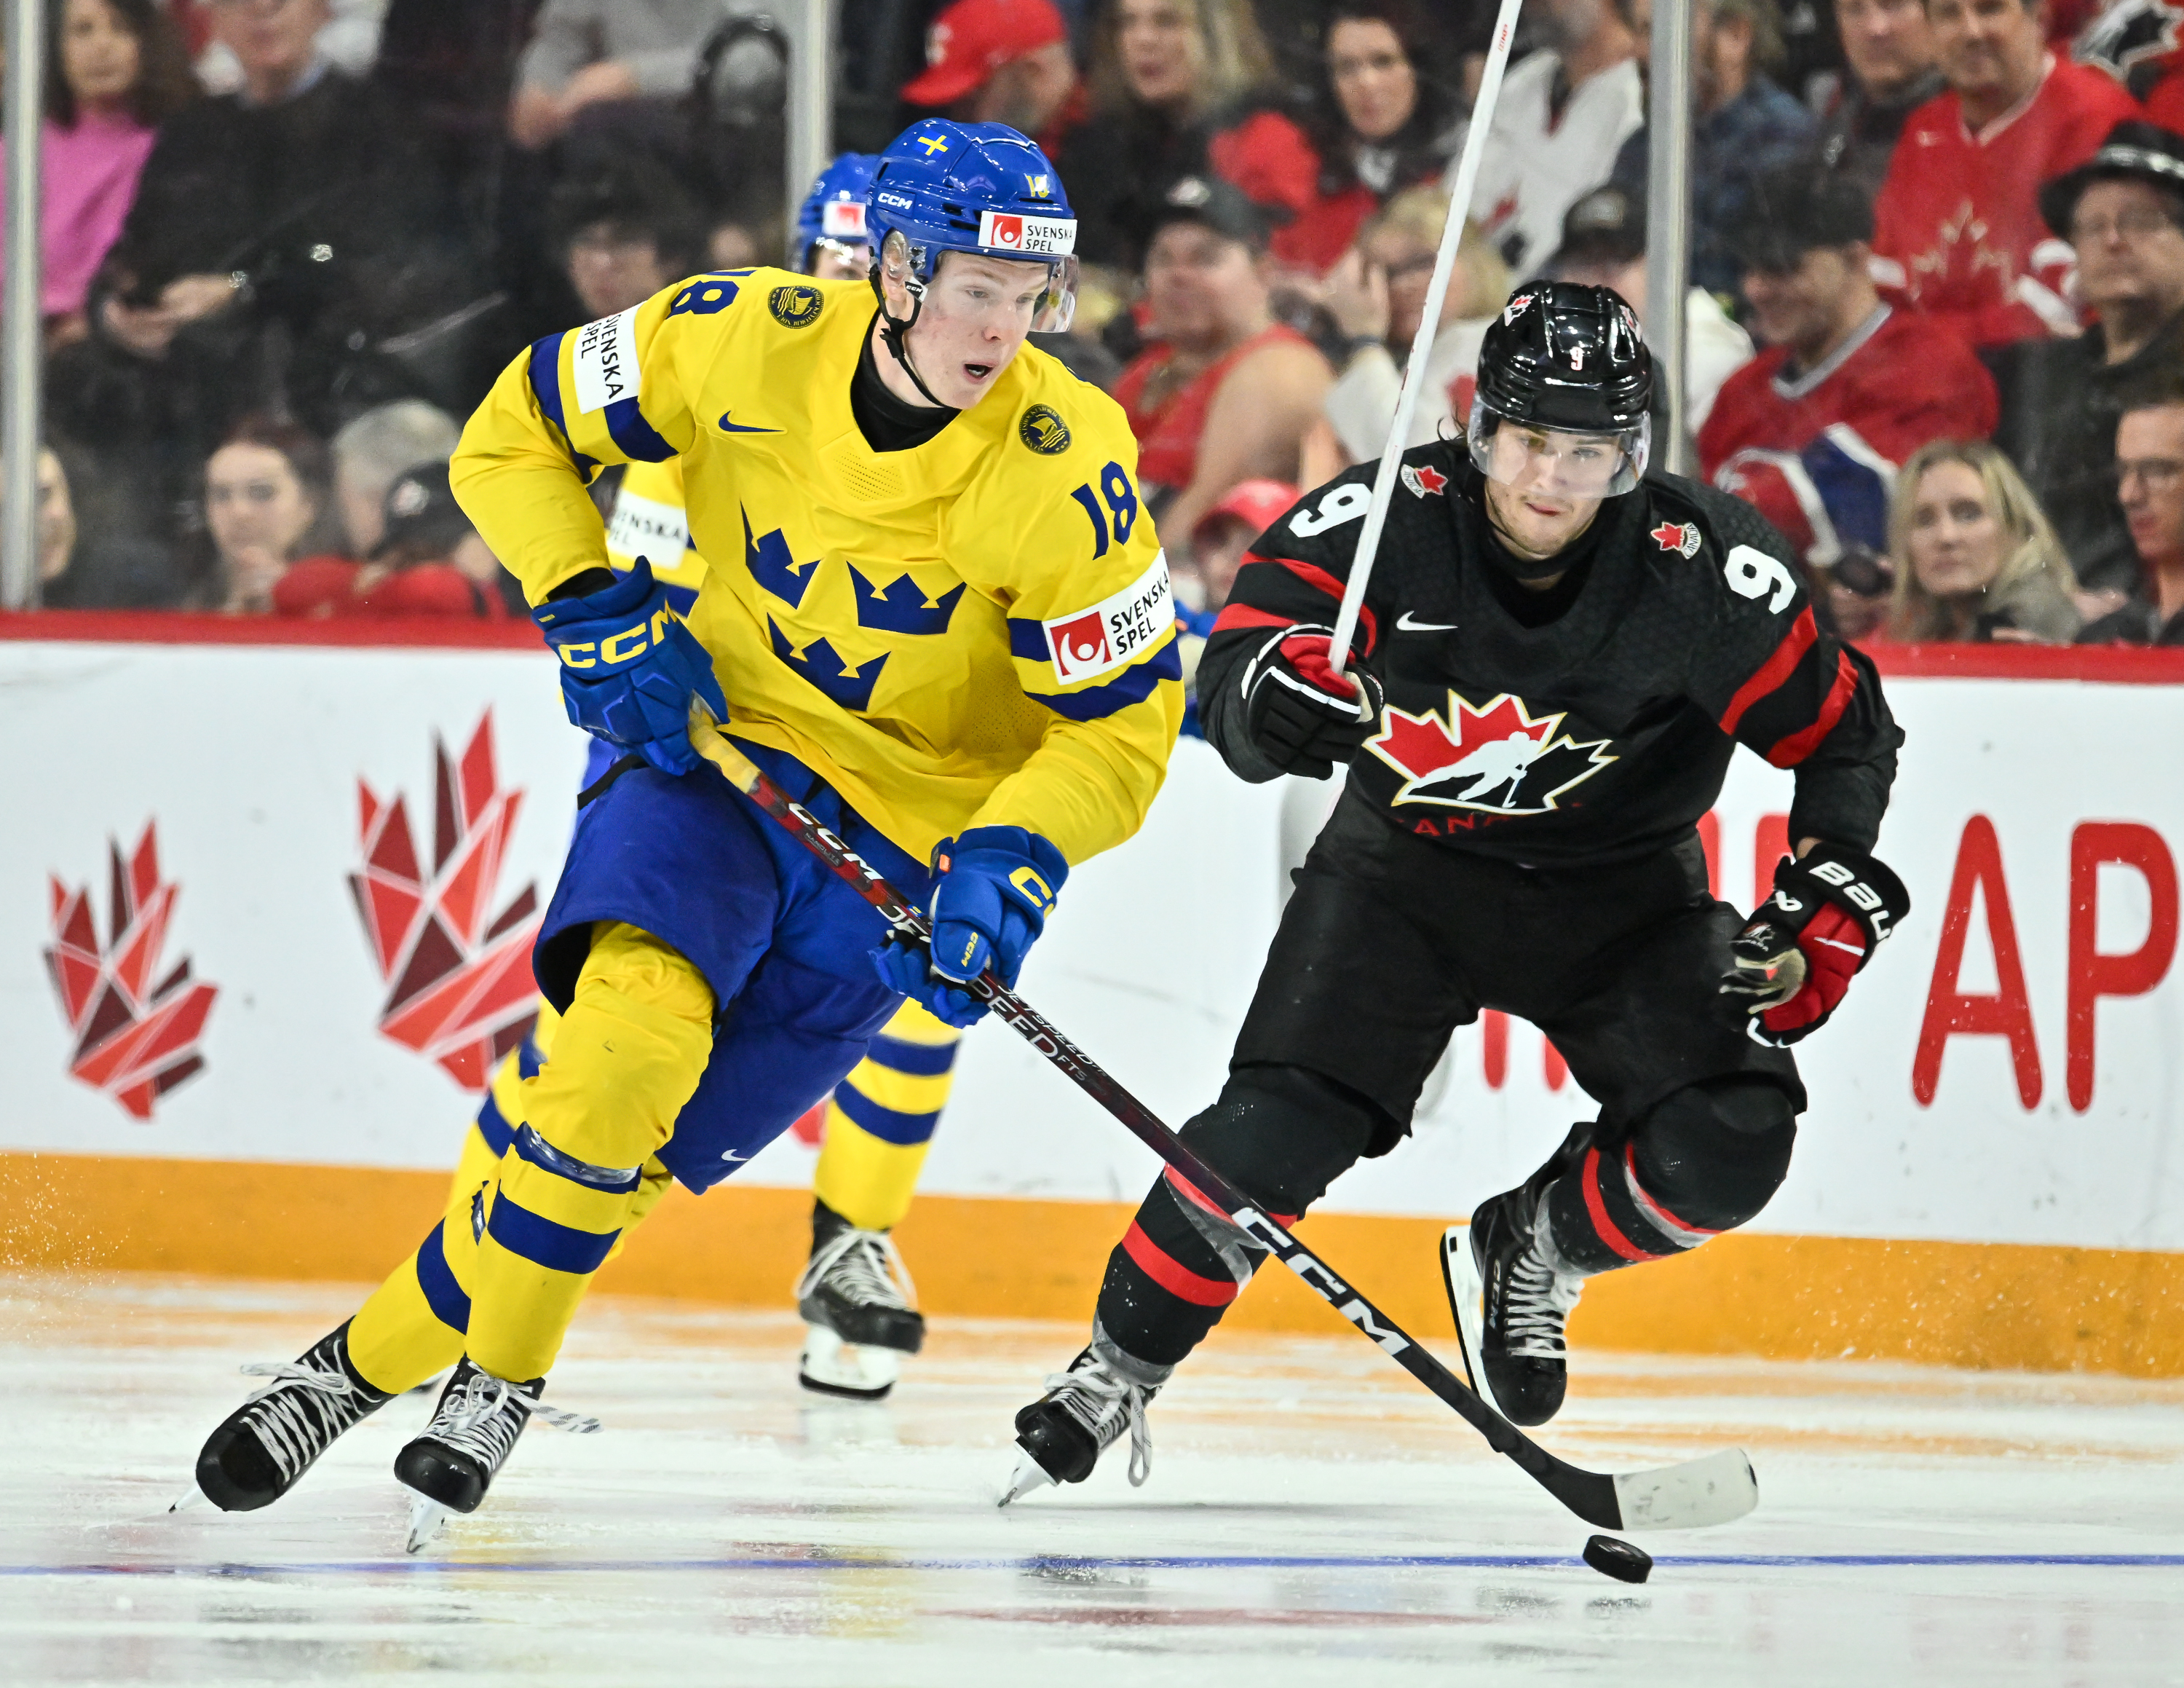 Filip Bystedt #18 of Team Sweden skates the puck against Joshua Roy #9 of Team Canada during the third period in the 2023 IIHF World Junior Championship at Scotiabank Centre on December 31, 2022 in Halifax, Nova Scotia, Canada. Team Canada defeated Team Sweden 5-1.